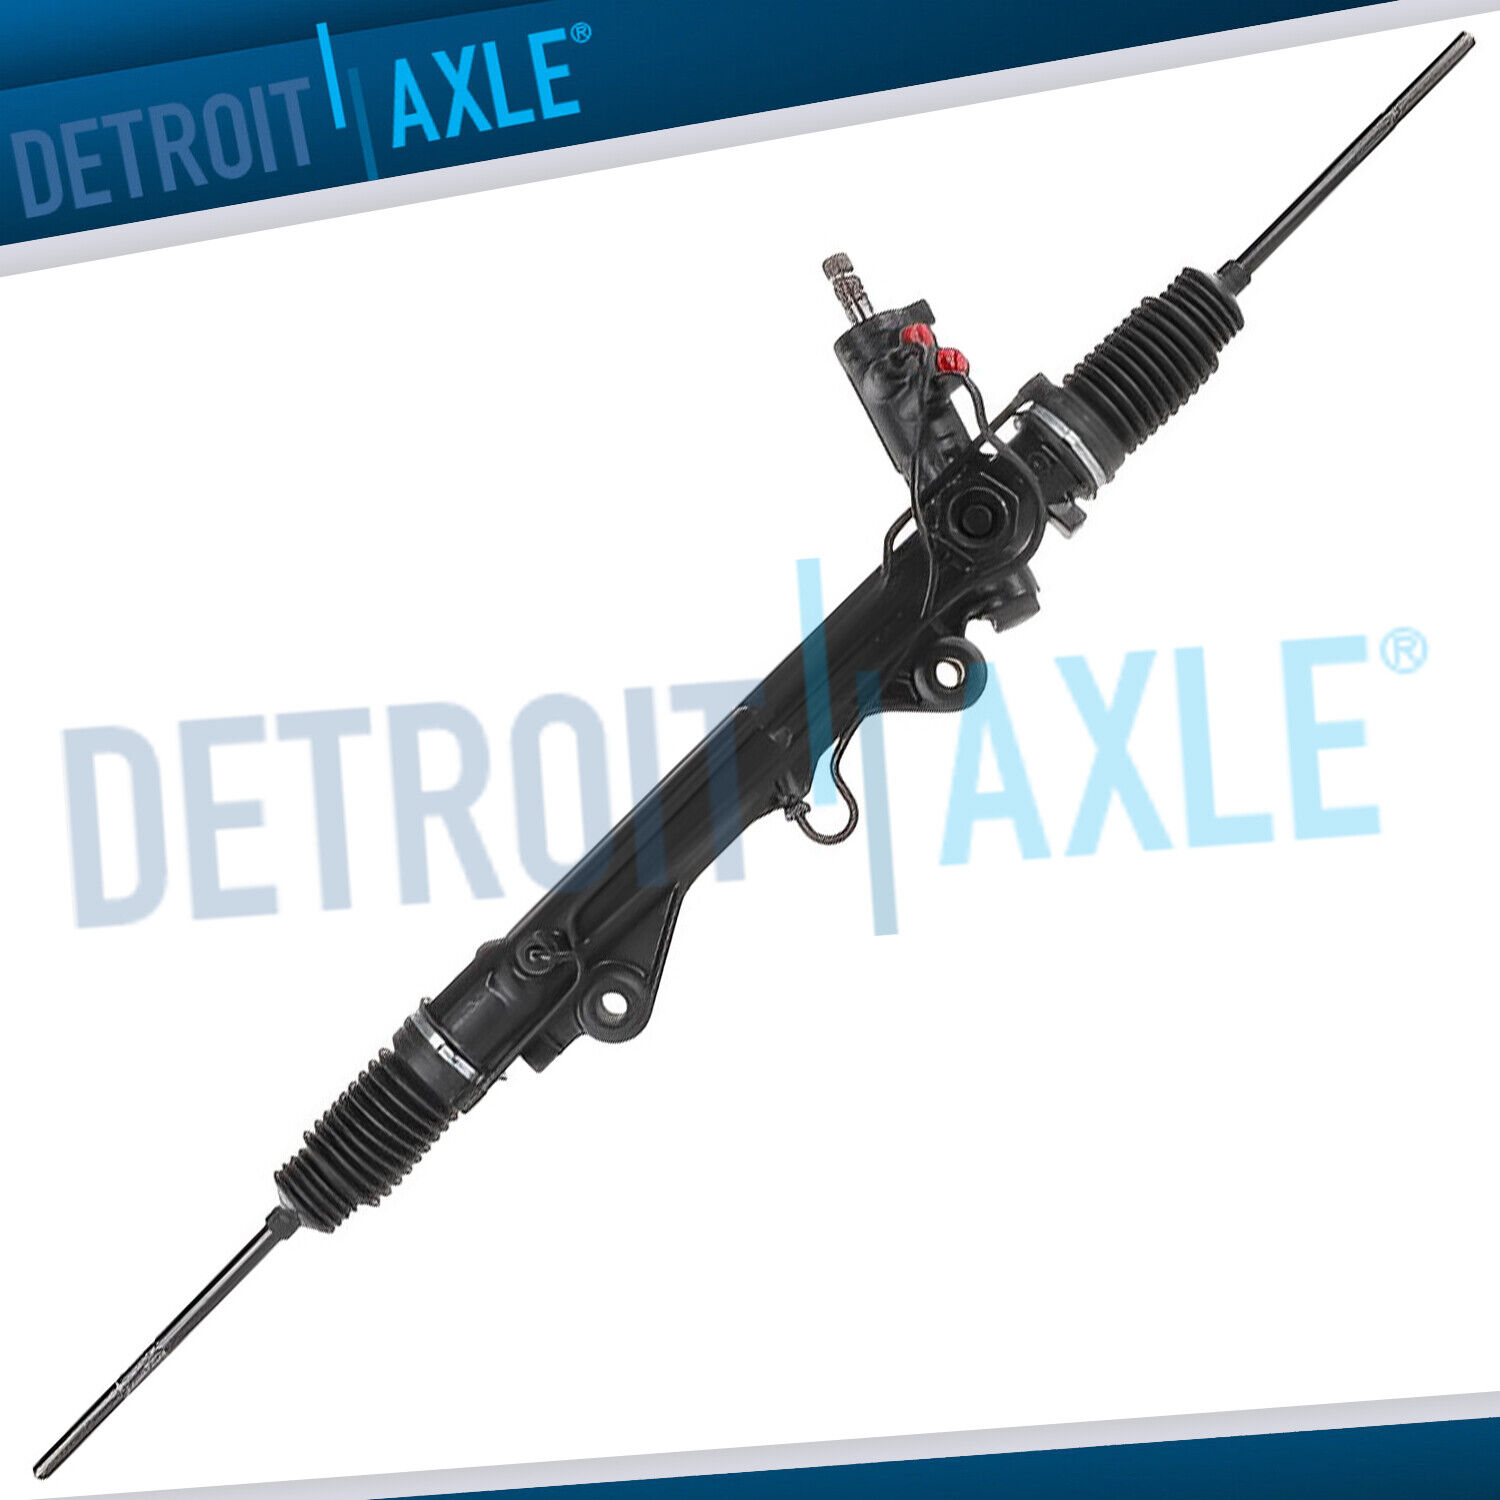 COMPLETE POWER STEERING RACK AND PINION ASSEMBLY for 1986-1997 AEROSTAR